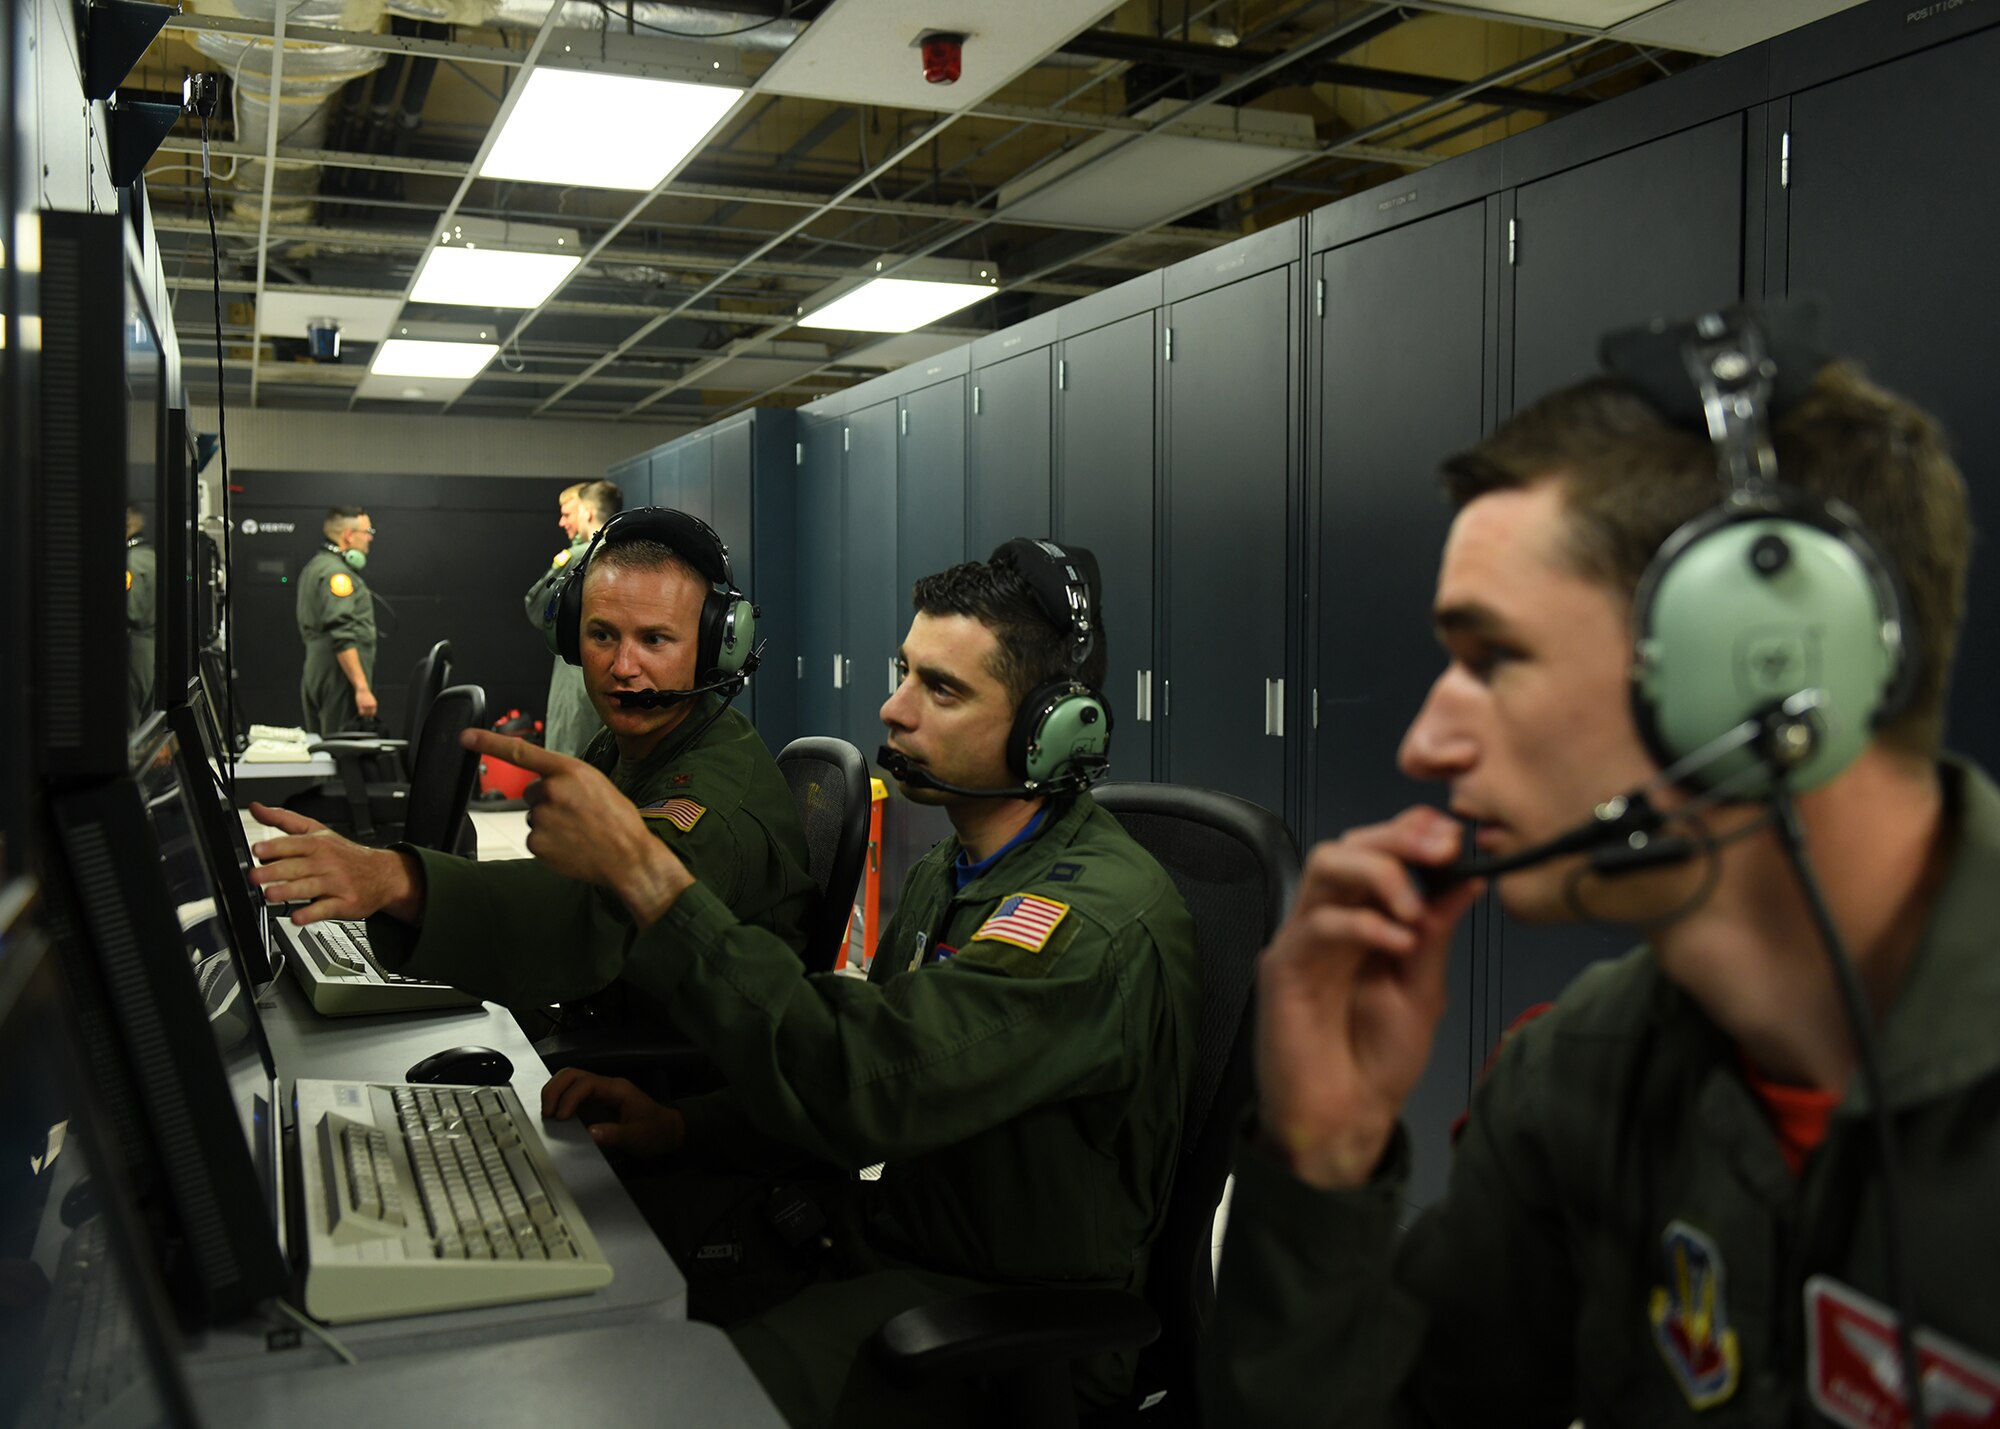 Three Airmen sit in front of a flight simulator terminal. Two men are pointing at computer screens.